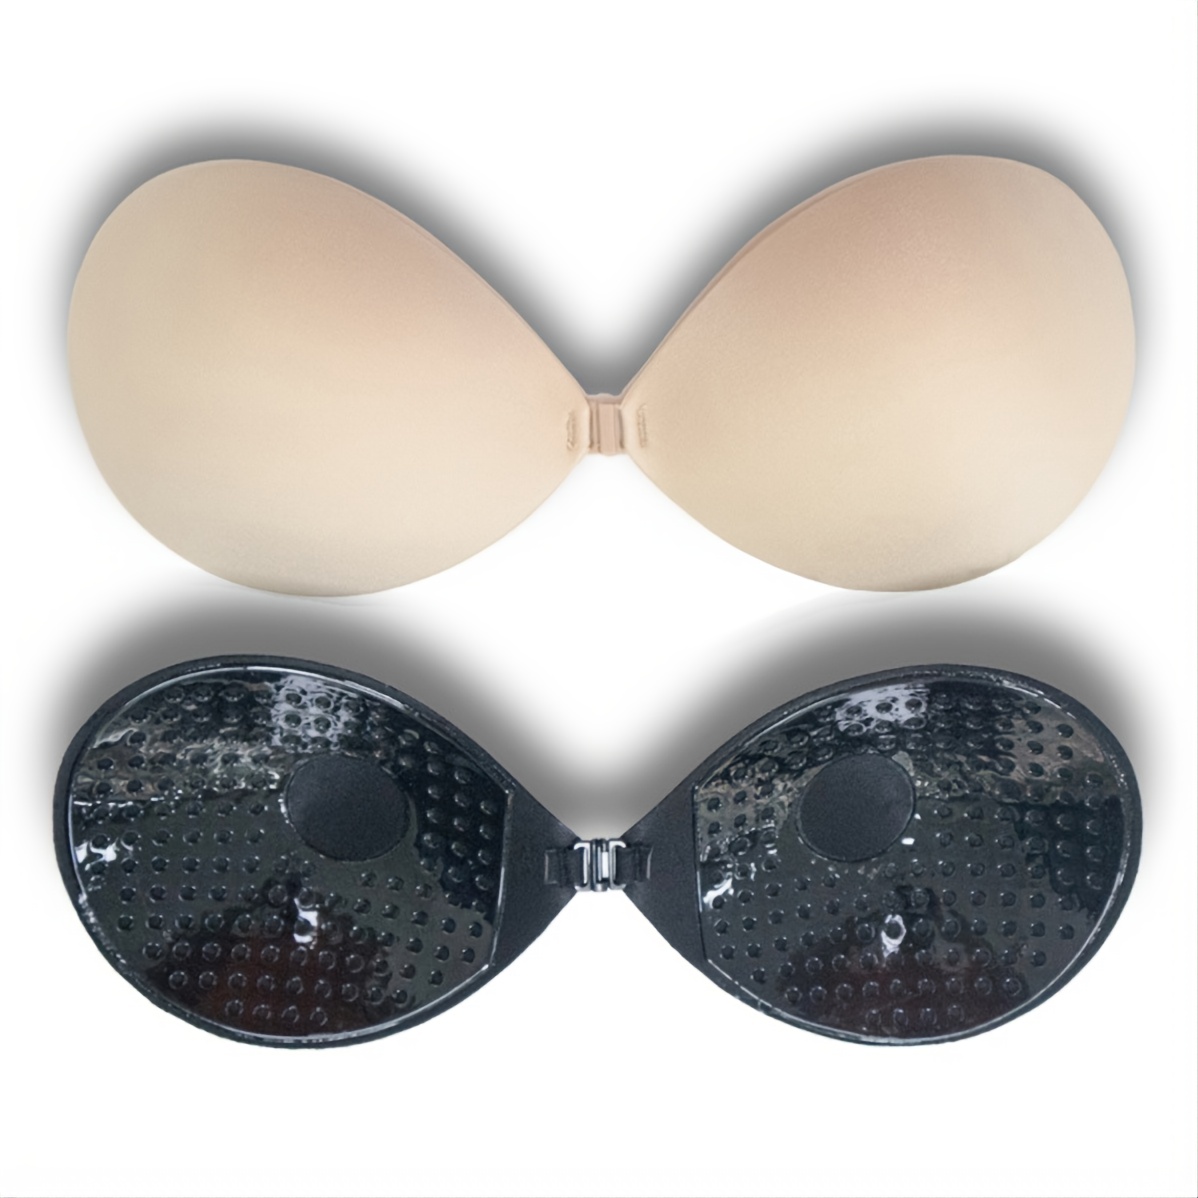 Women's Self Adhesive Bras, 2 Pack Reusable Invisible Self